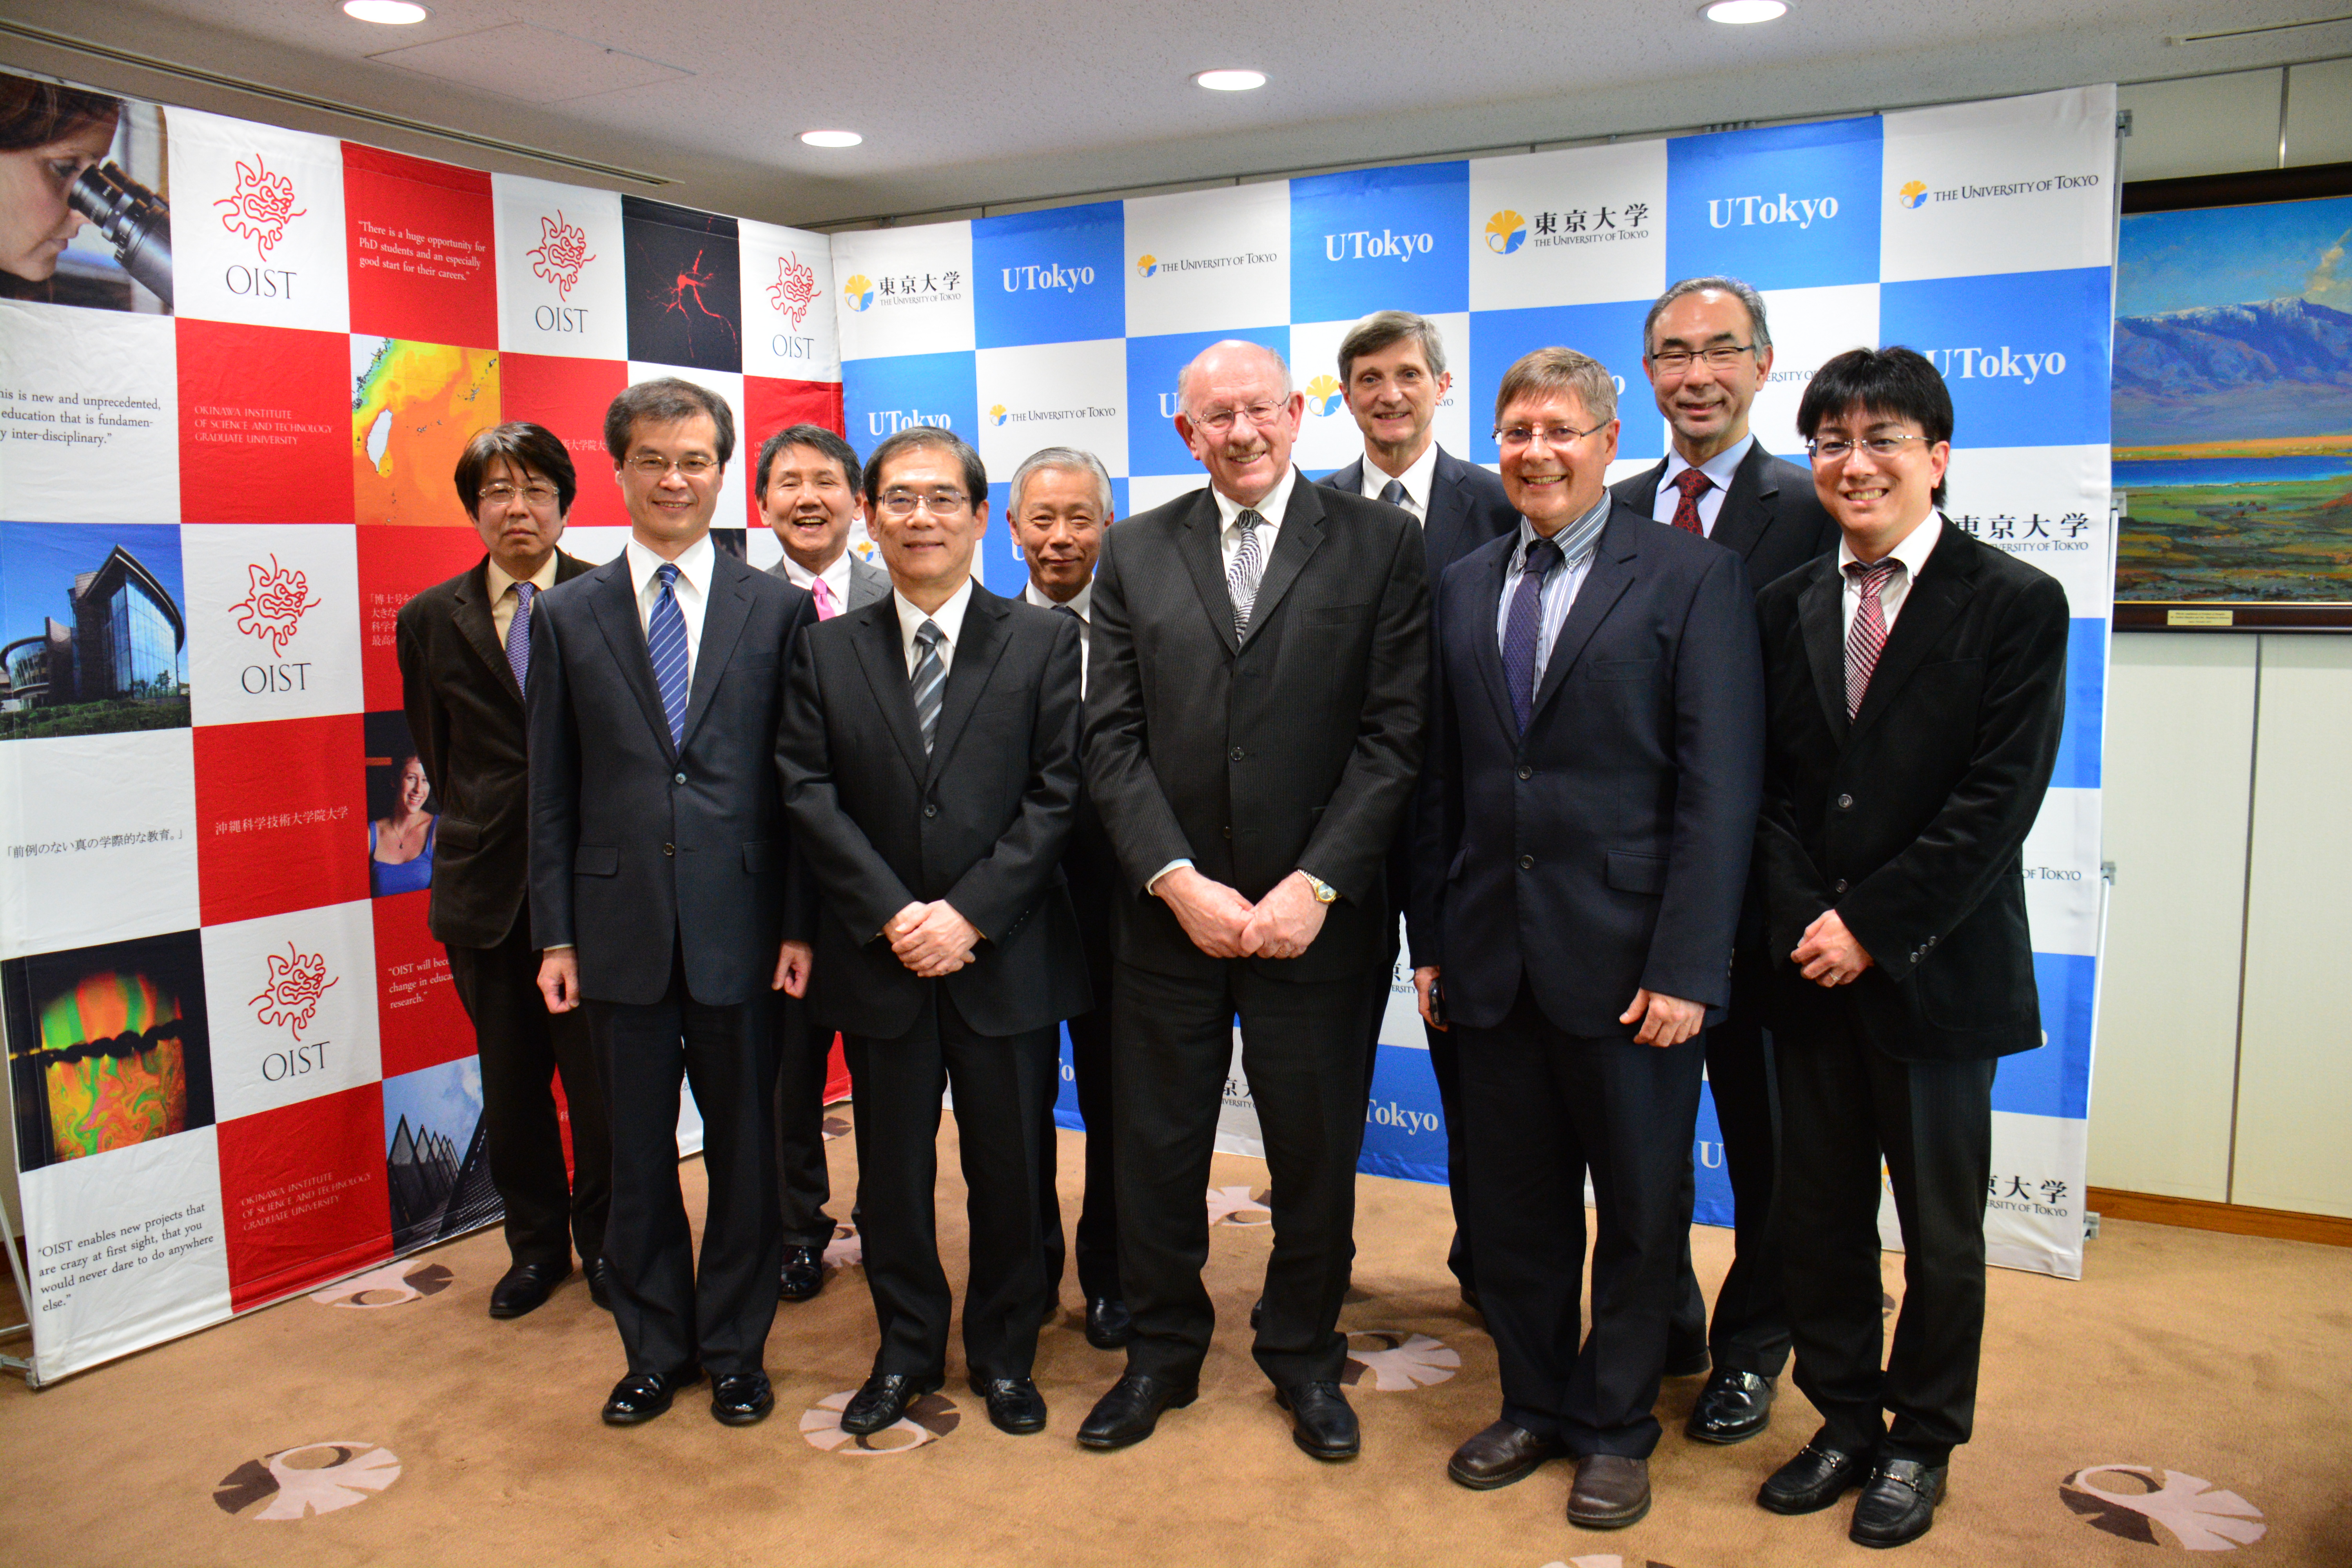 OIST Executives and their counterparts at the University of Tokyo 28 Jan 2014